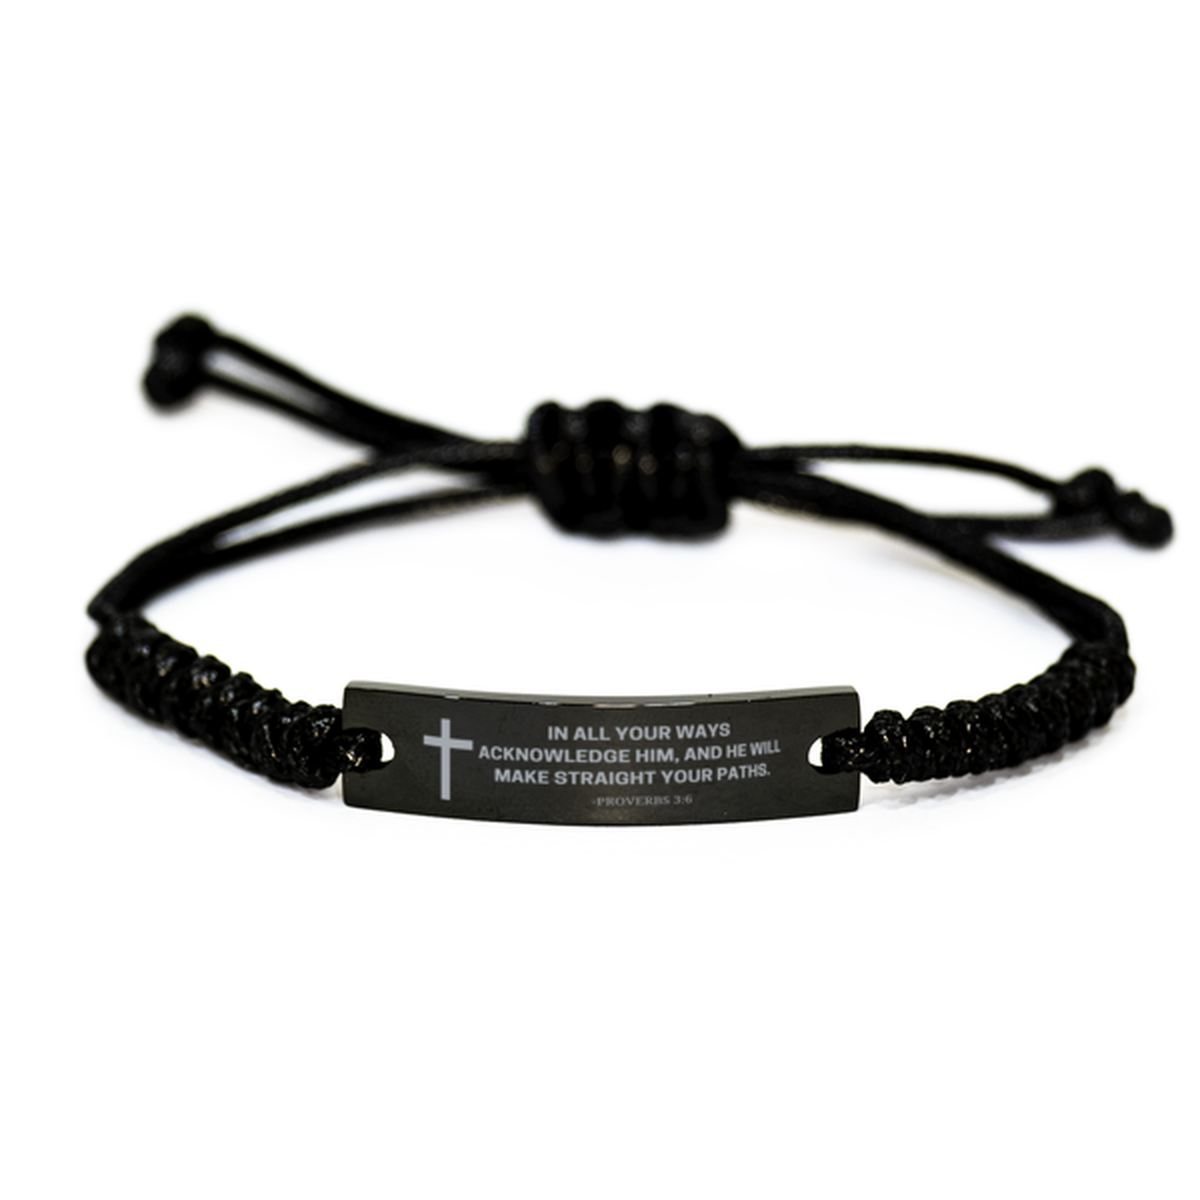 Baptism Gifts For Teenage Boys Girls, Christian Bible Verse Black Rope Bracelet, In all your ways acknowledge Him, Catholic Confirmation Gifts for Son, Godson, Grandson, Nephew